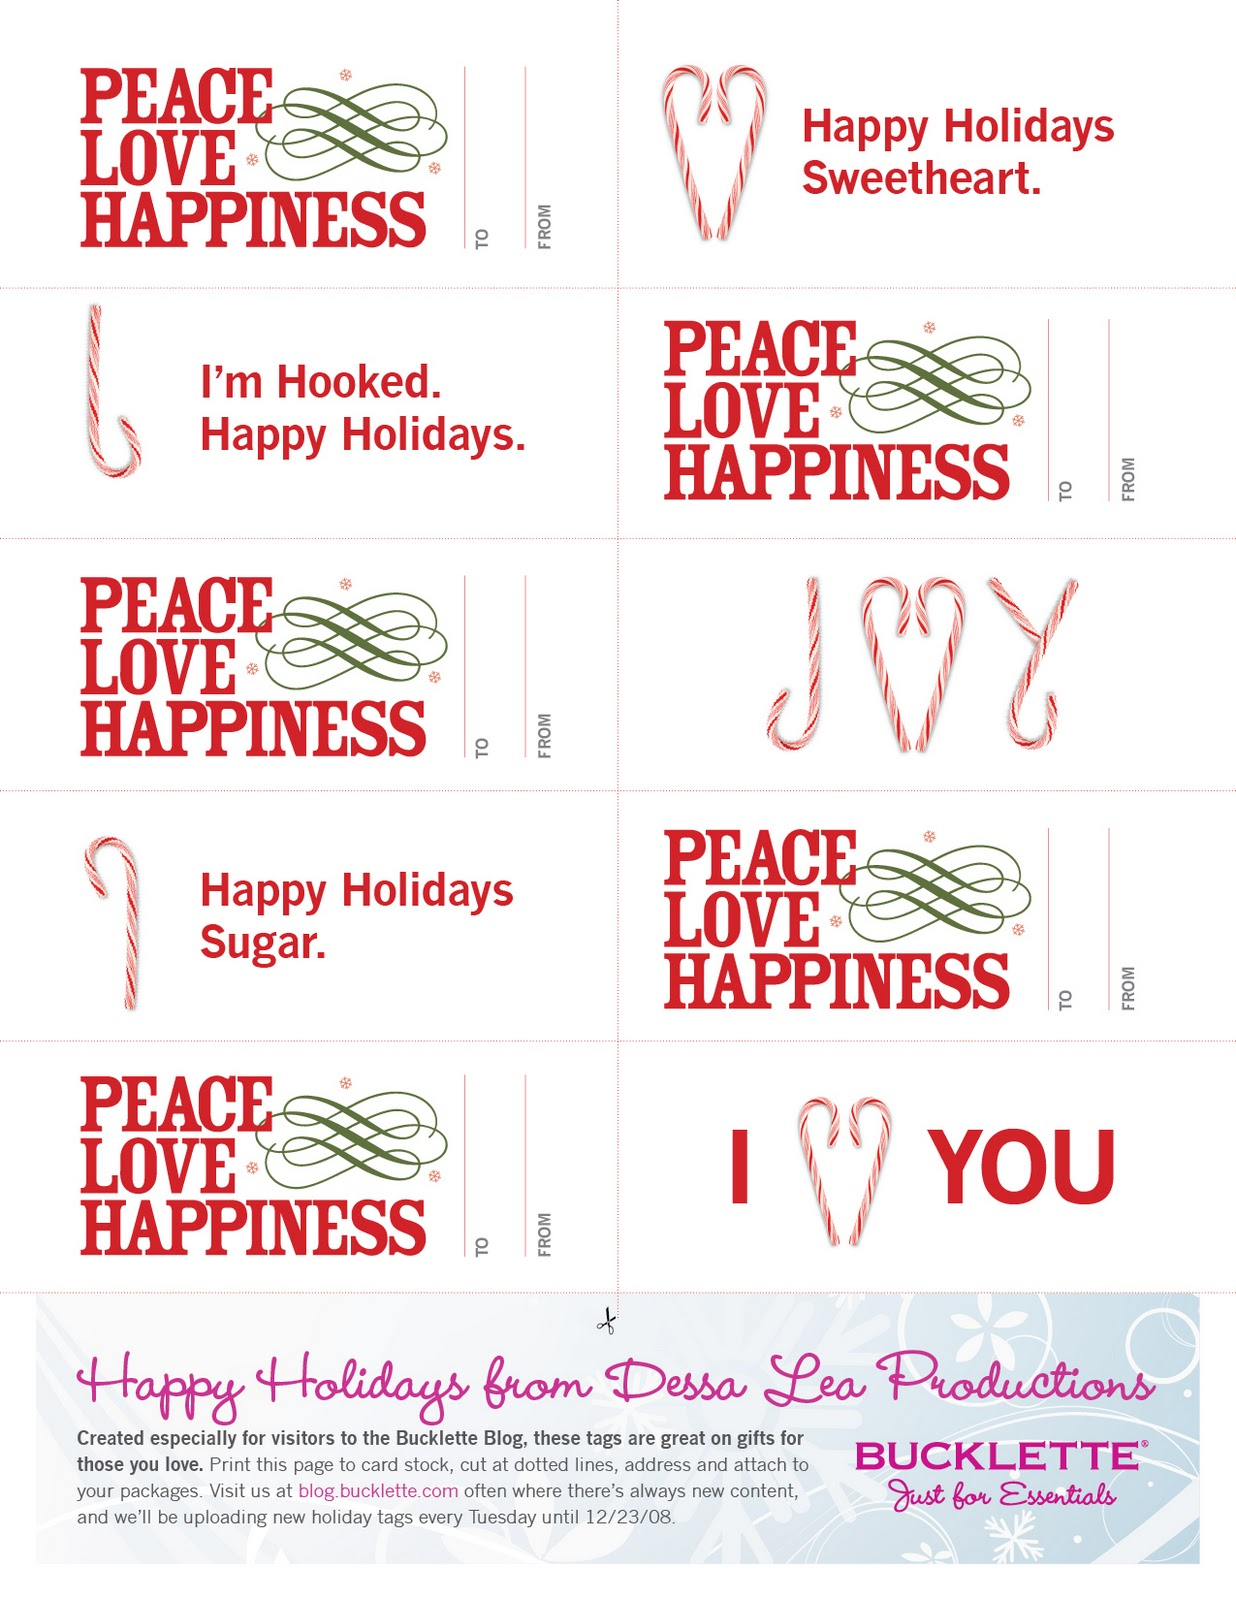 Free Christmas Printables And Gift Ideas - Making Memories With Your - Grinch Pills Free Printable